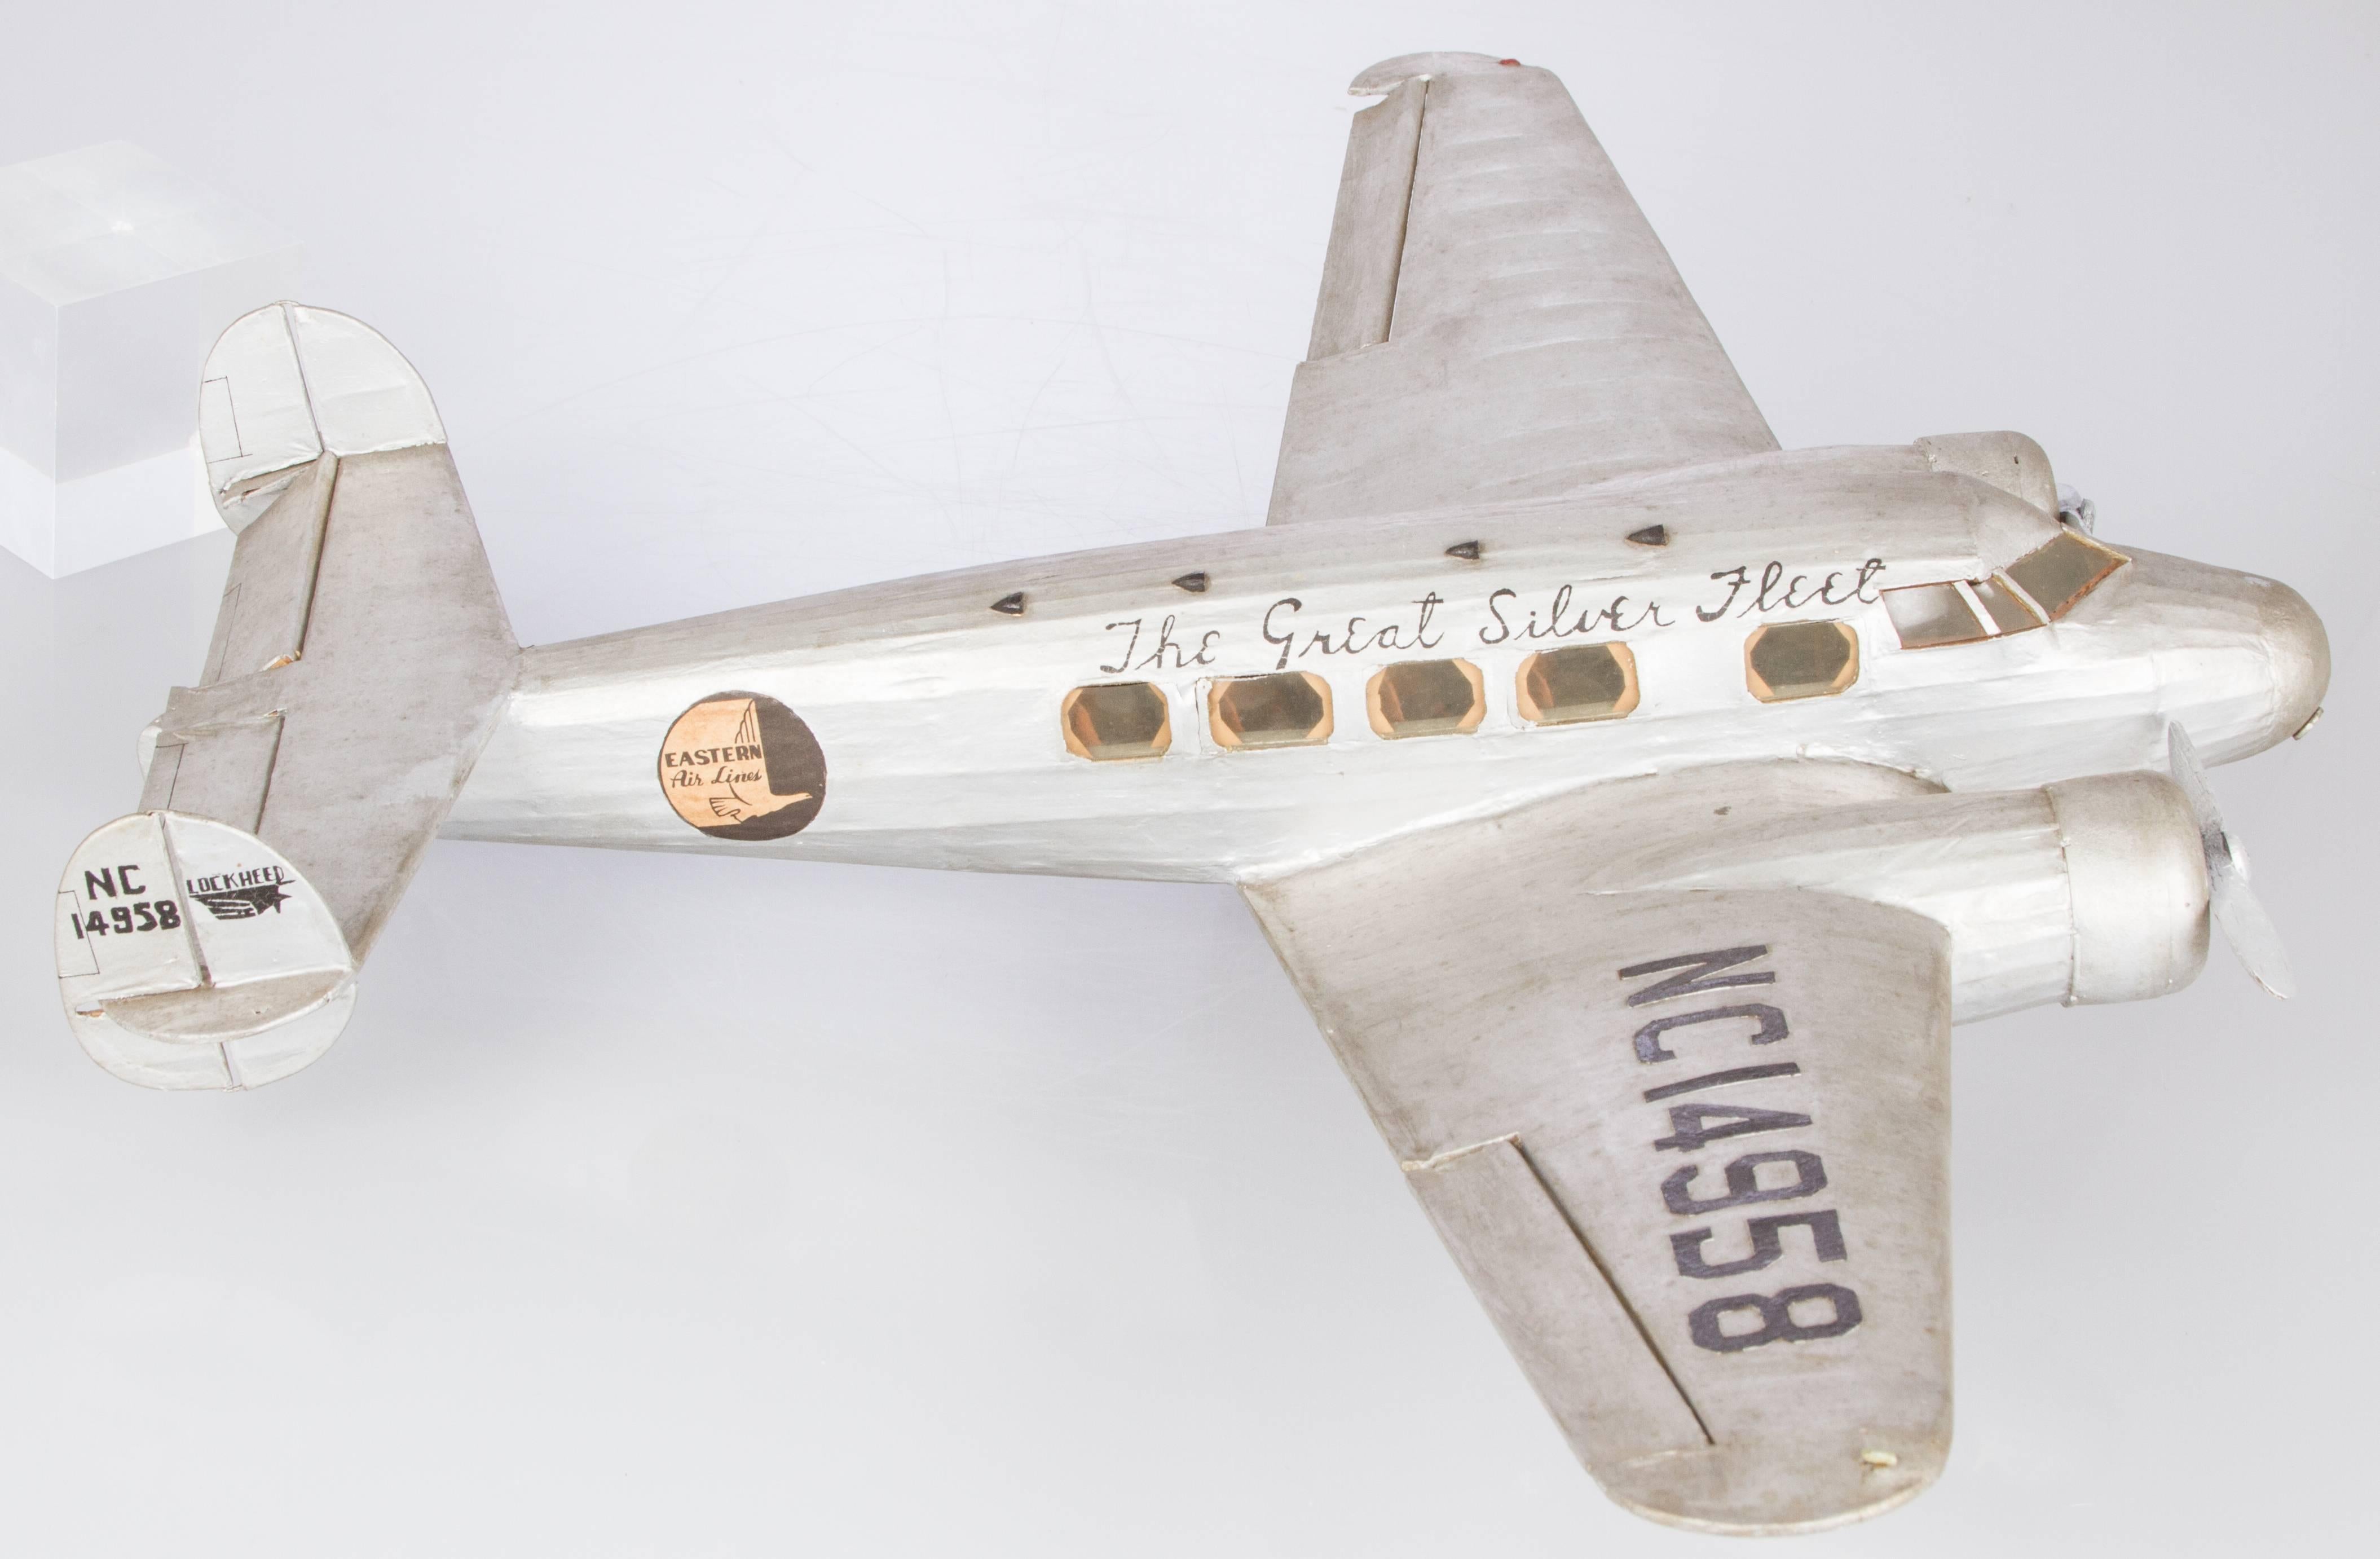 Great Silver Fleet Eastern Airlines Lockheed Y1C-37 Model Airplane In Good Condition For Sale In Chicago, IL